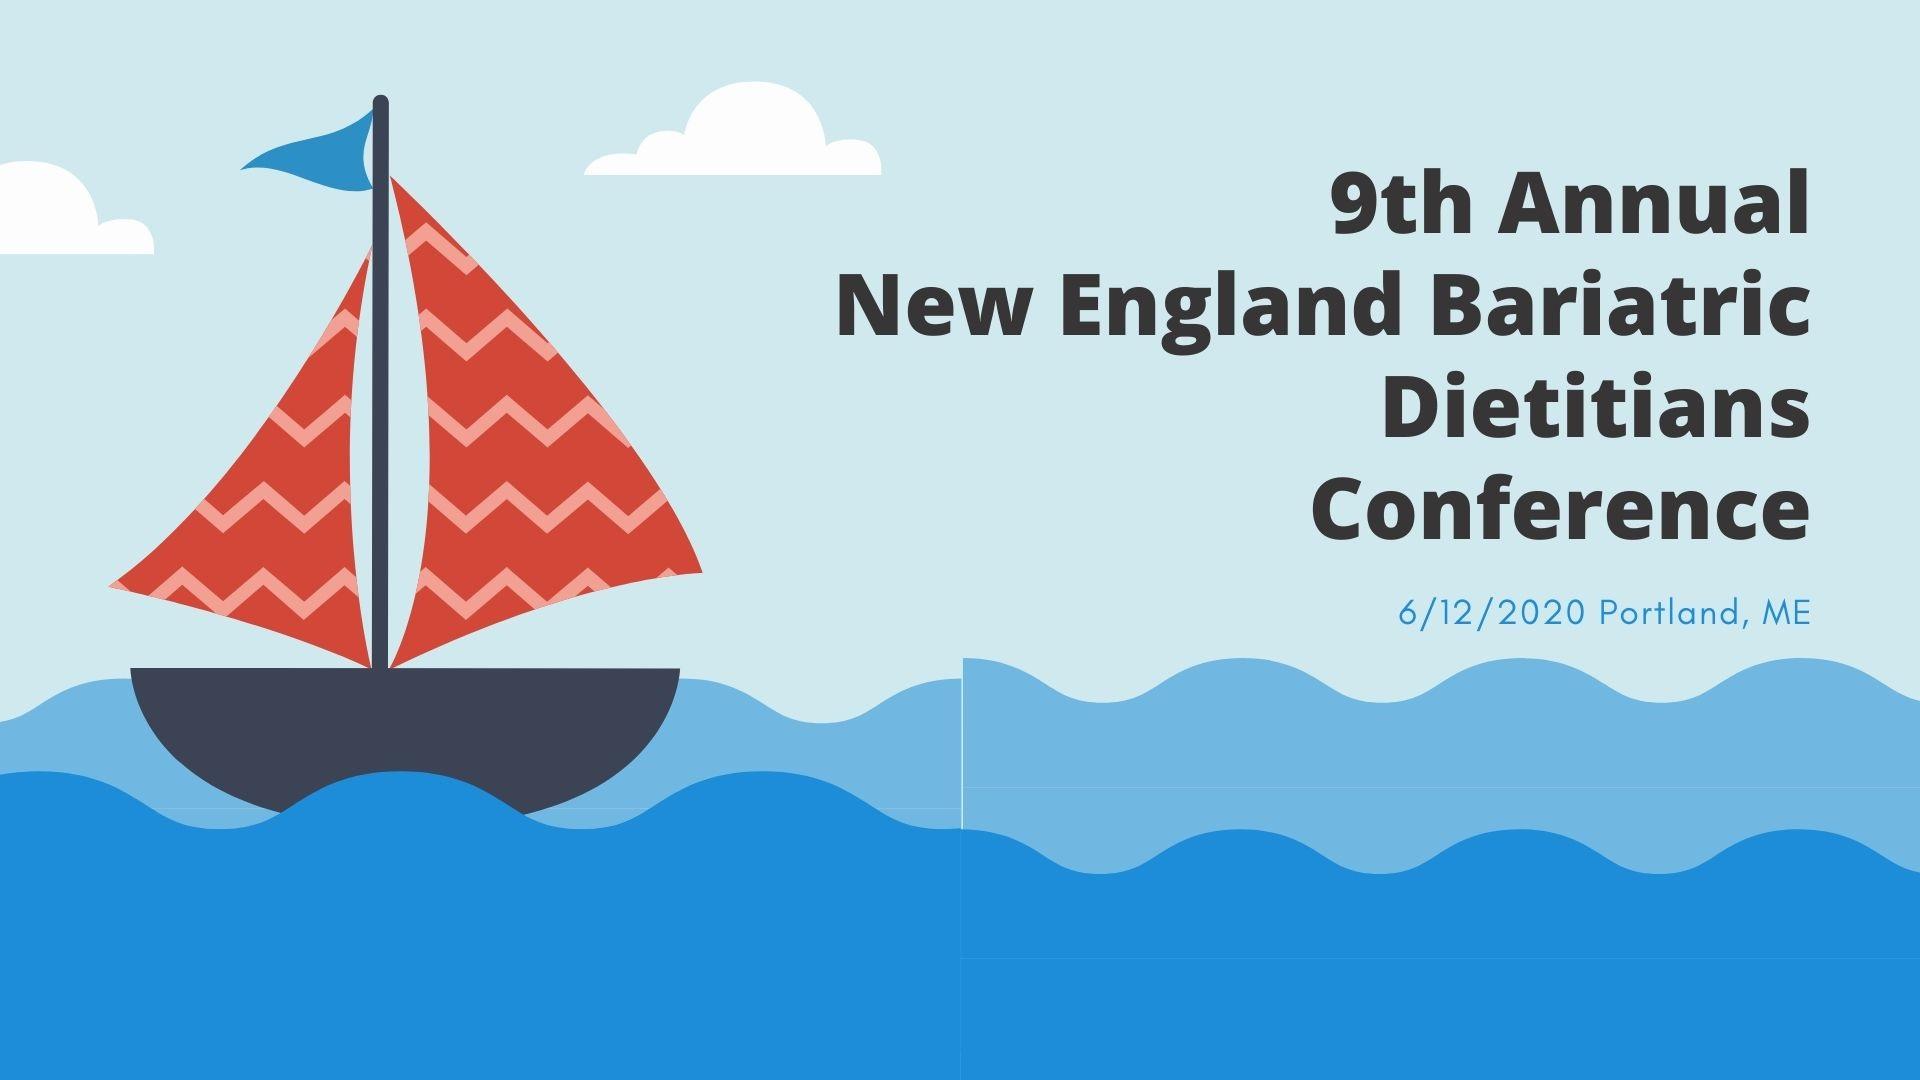 New England Bariatric Dietitians Conference